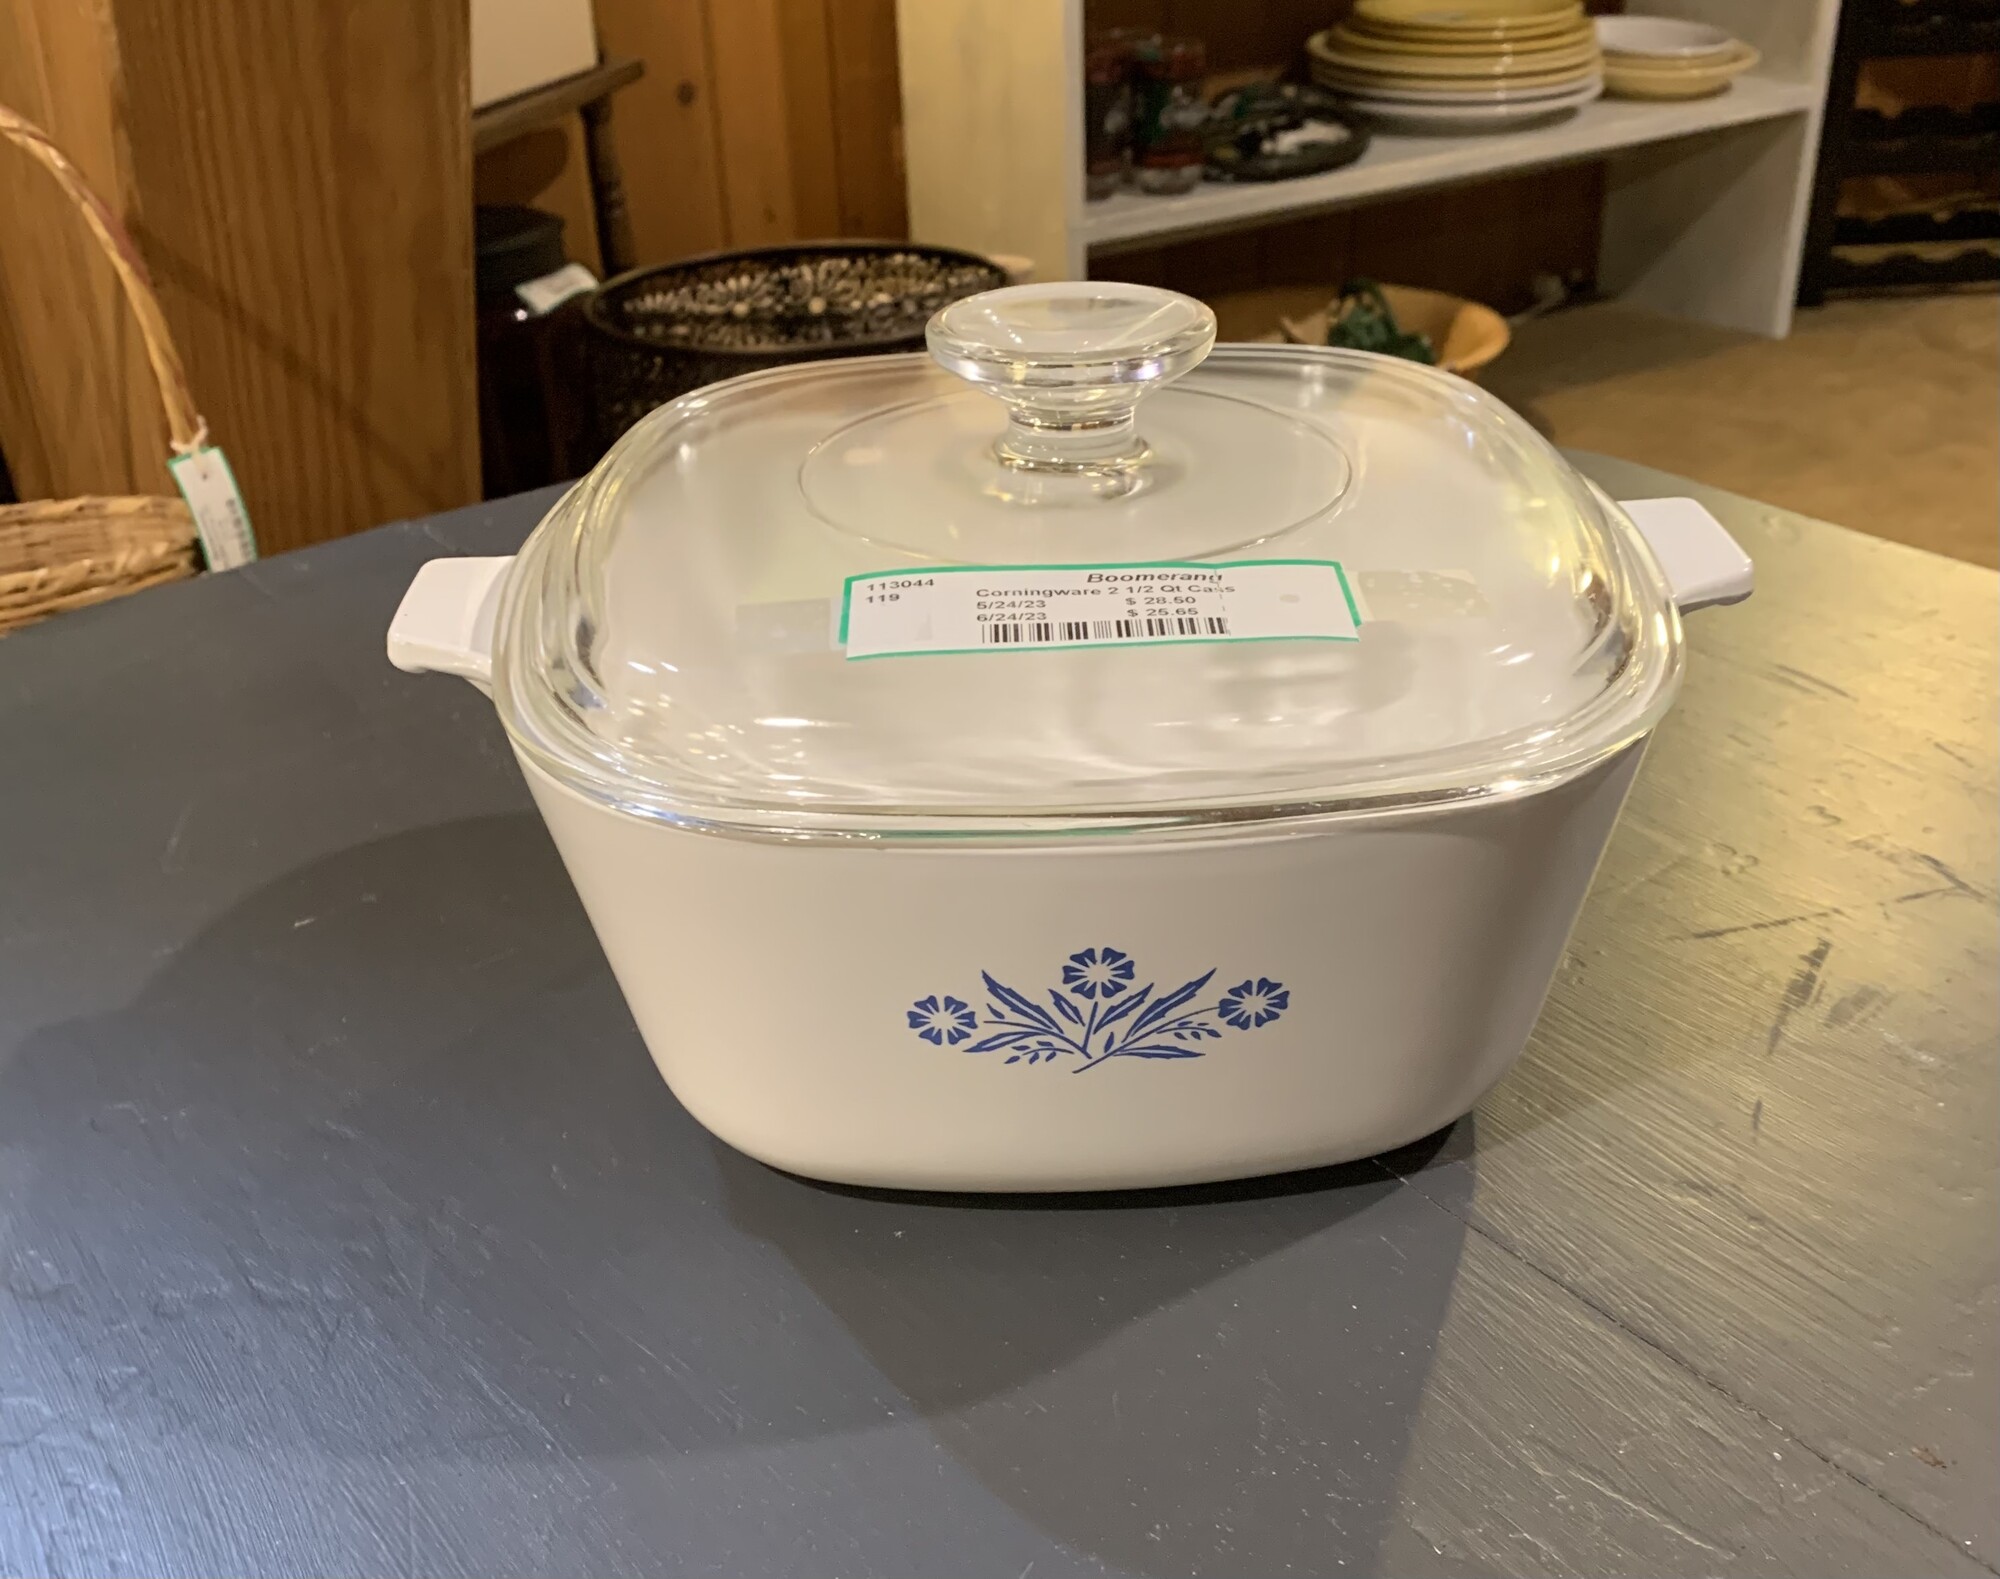 Corningware 2 1/2 Qt Casserole
This casserole dish is white with the blue cornflower design.  It has a glass cover and is in near perfect condition.